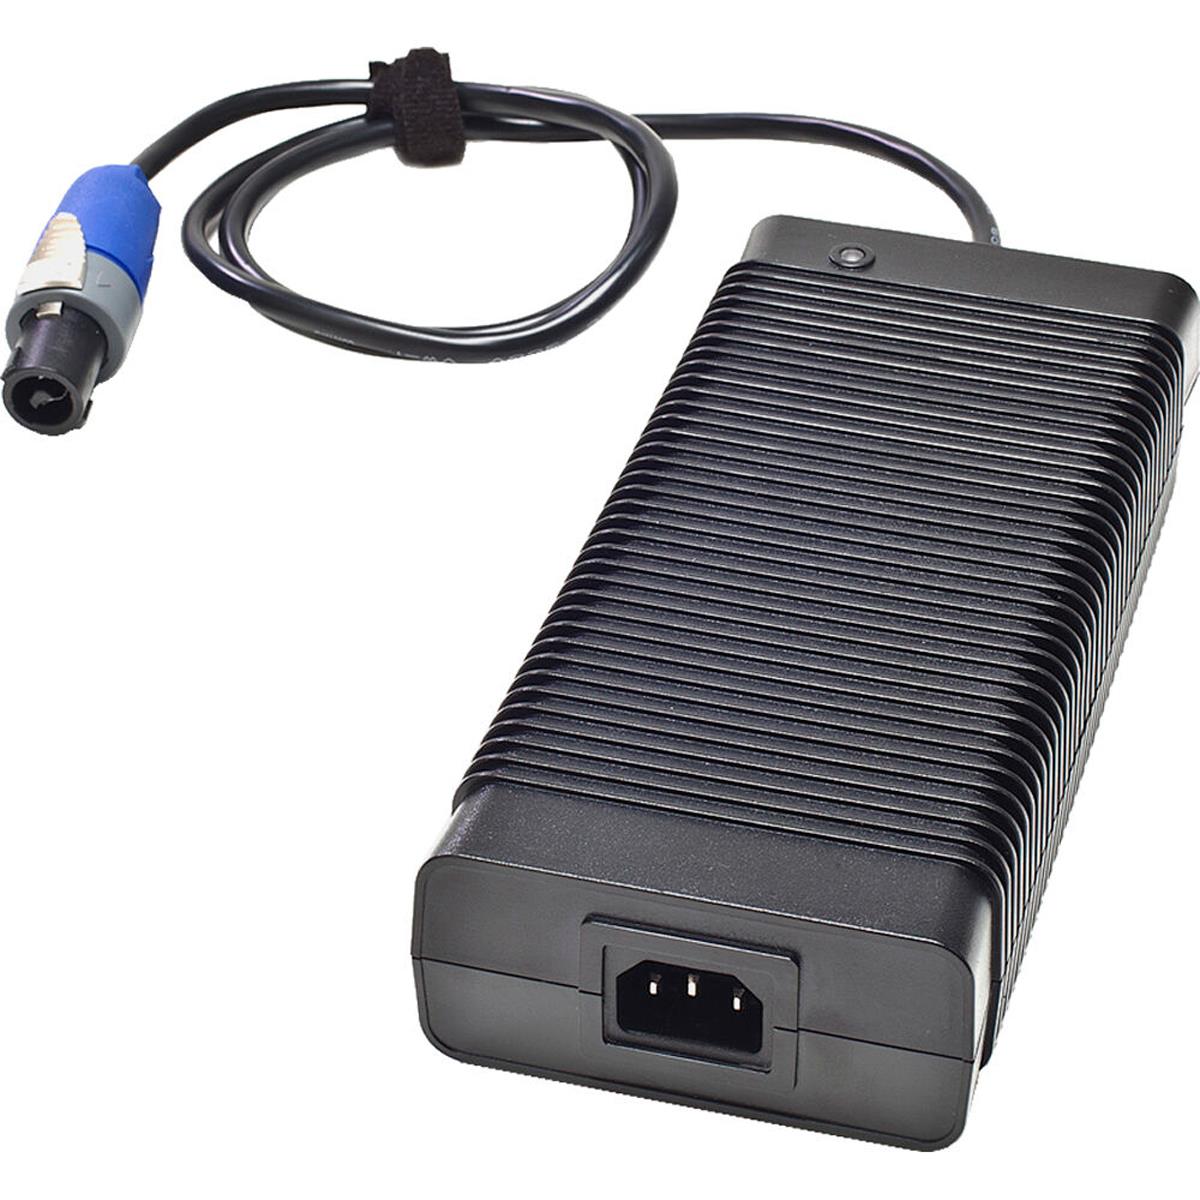 Image of Carpet Light 24V 280W AC Power Supply with speakON Connector for CL84 Lamp Head